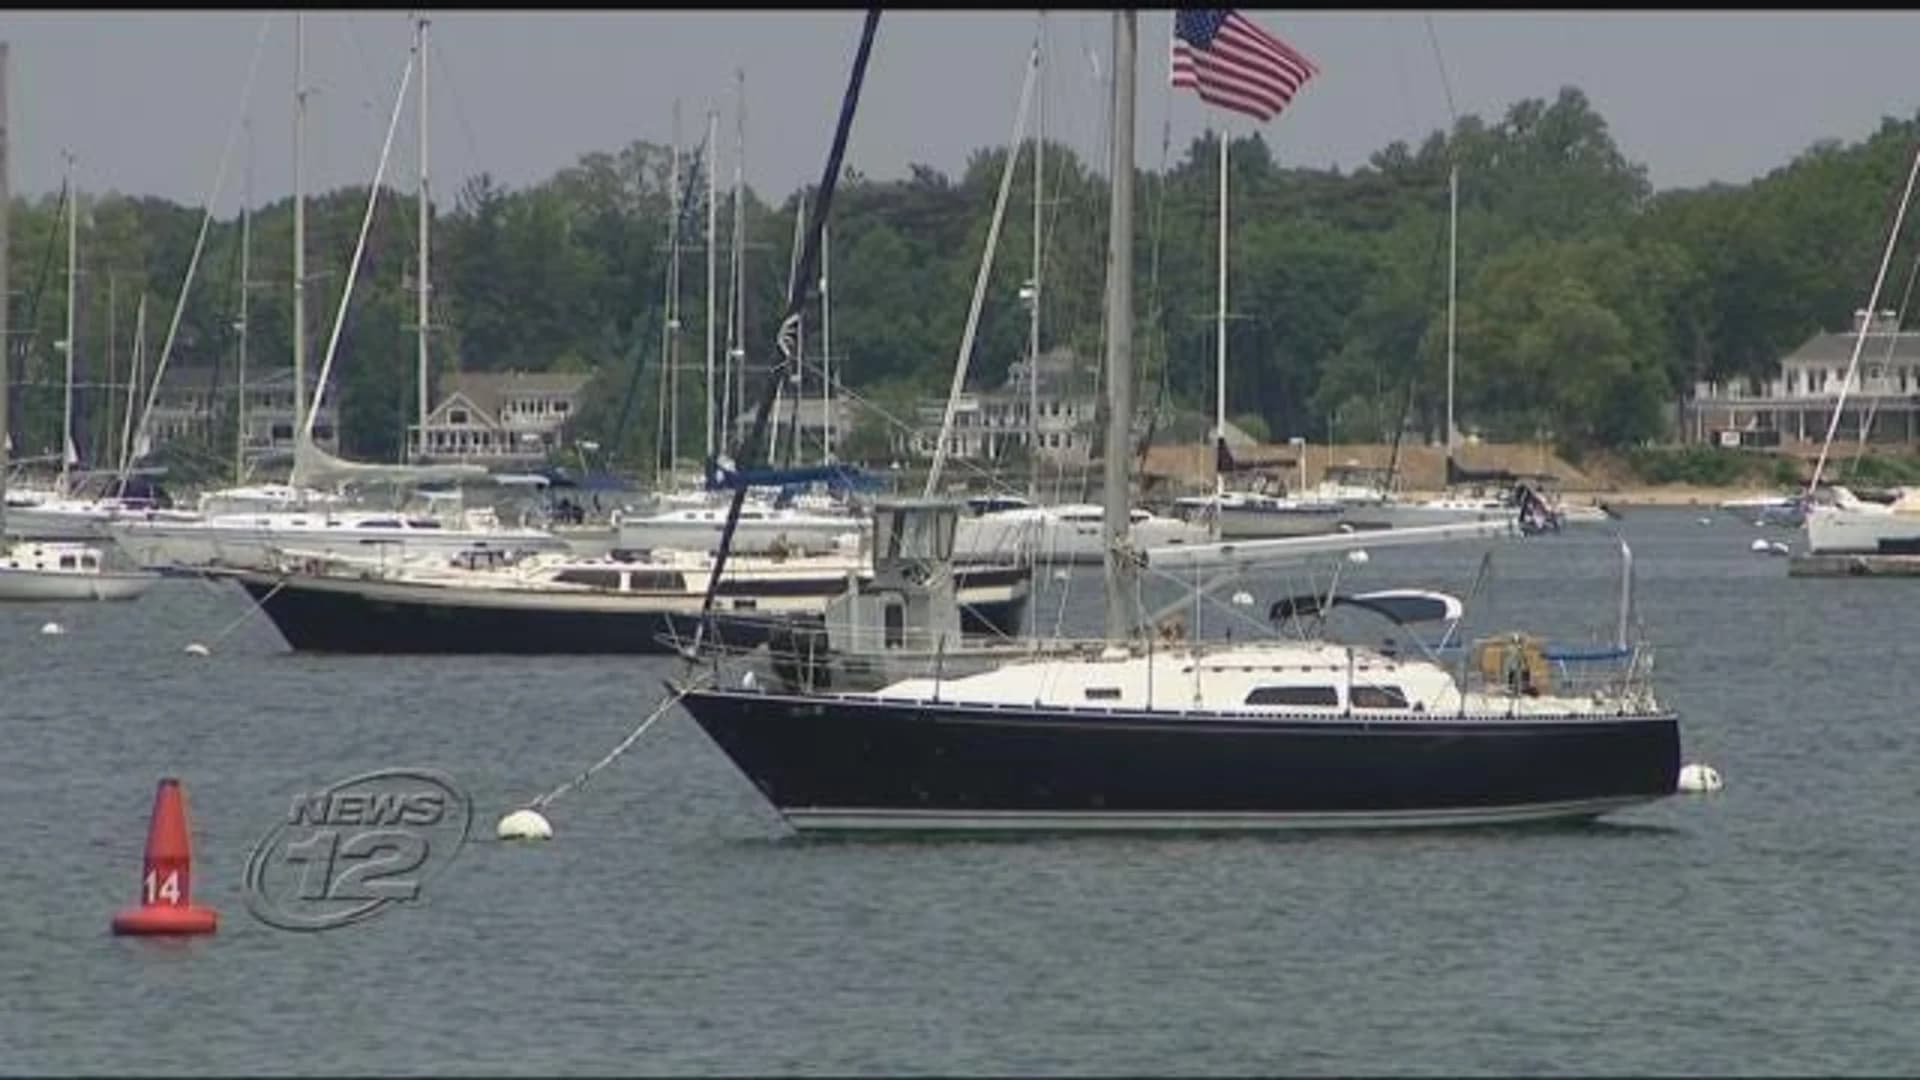 Governors of NY, NJ, CT announce plan to allow boatyards, marinas to open